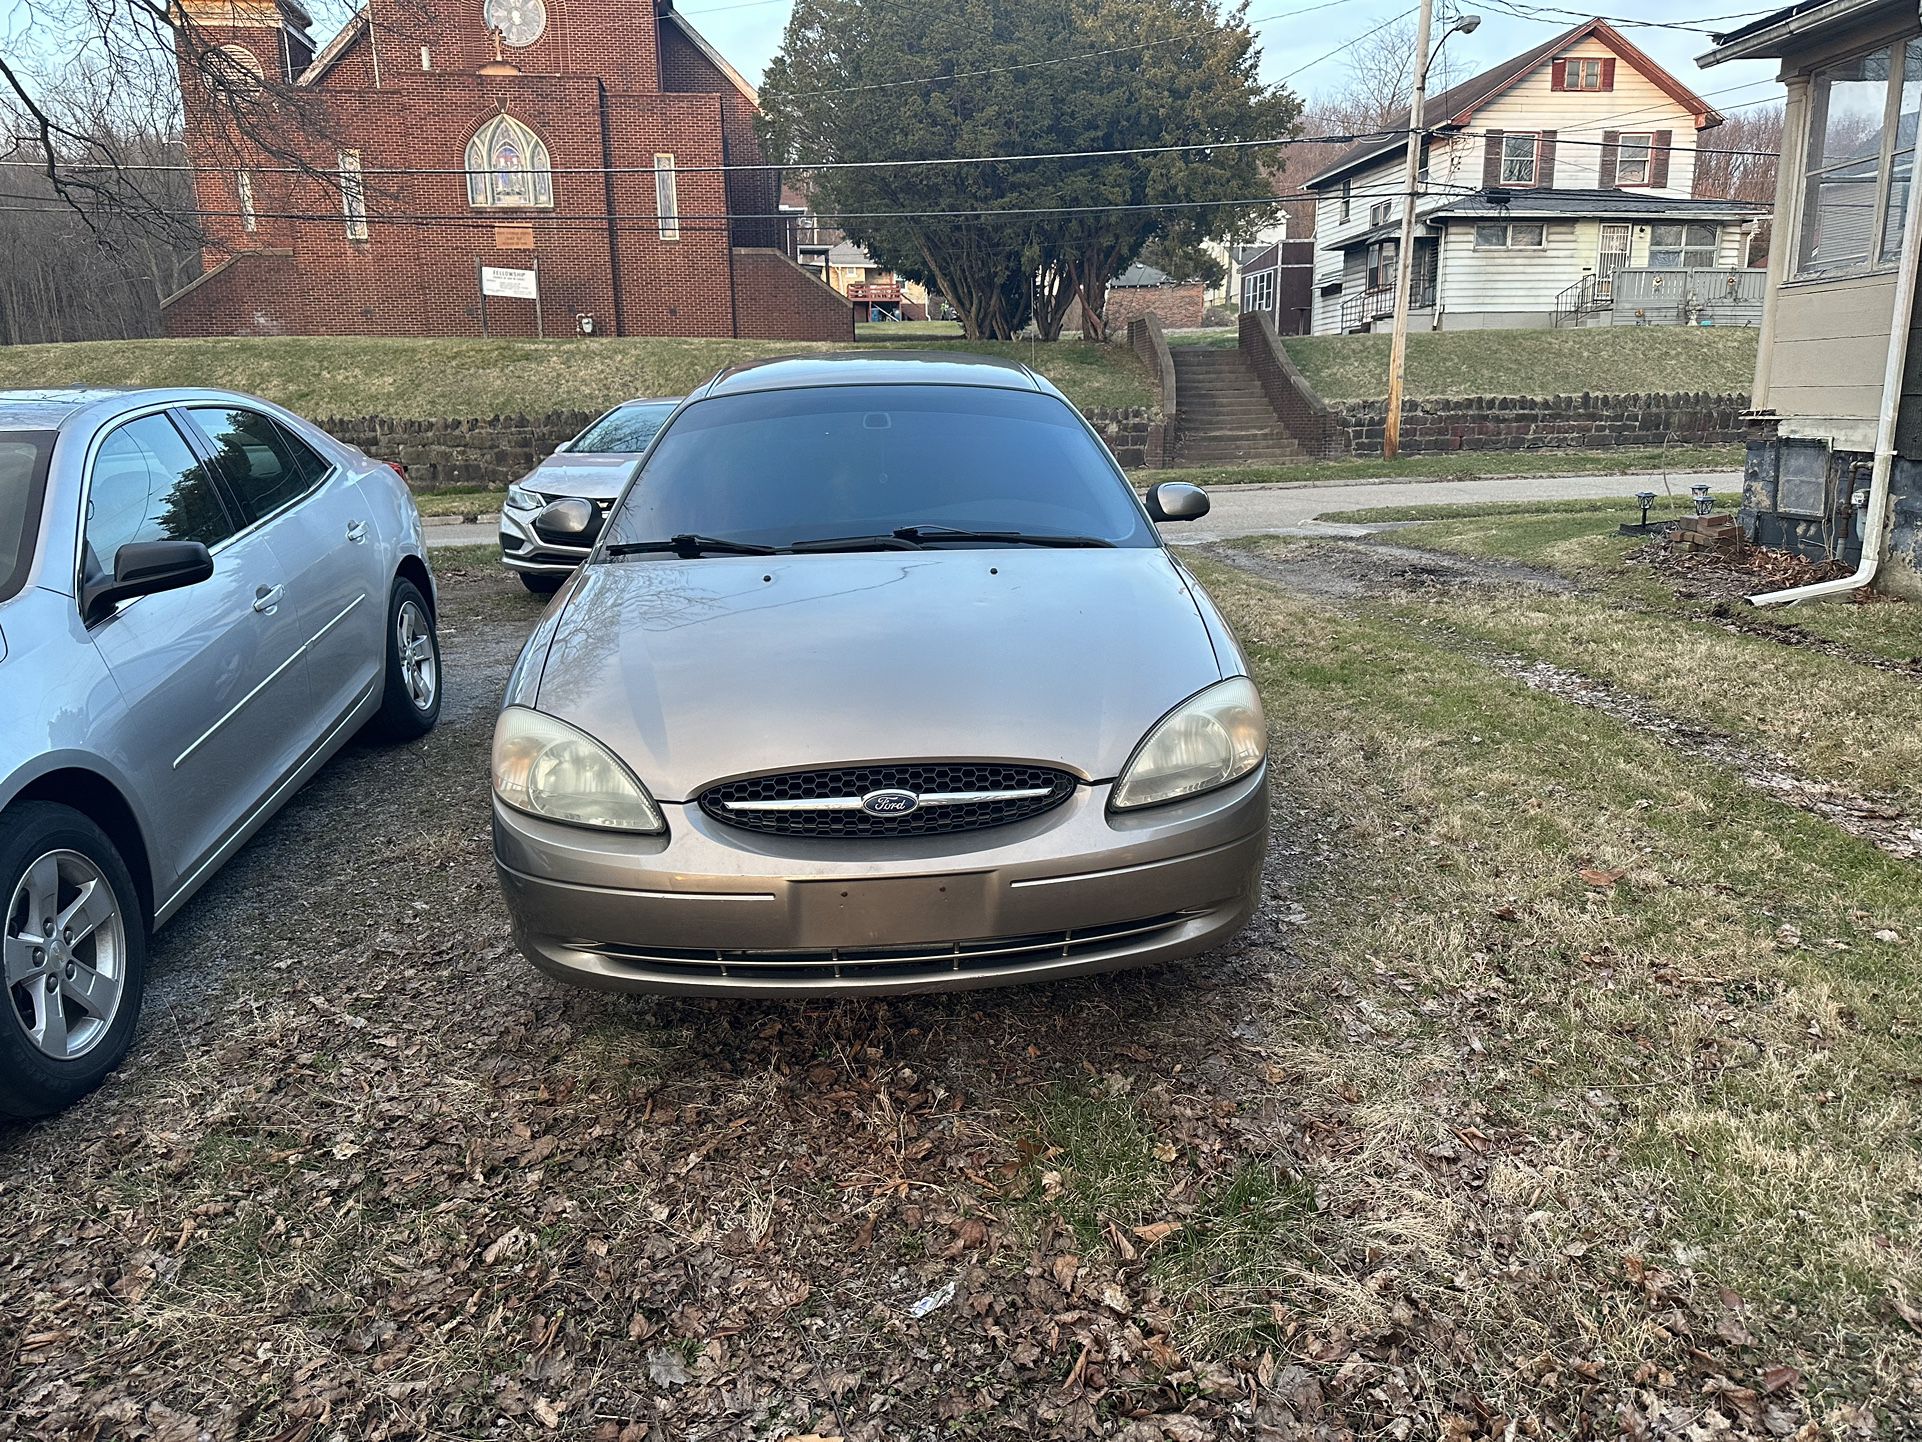 2003 Ford Taurus For Sale In Struthers Oh Offerup